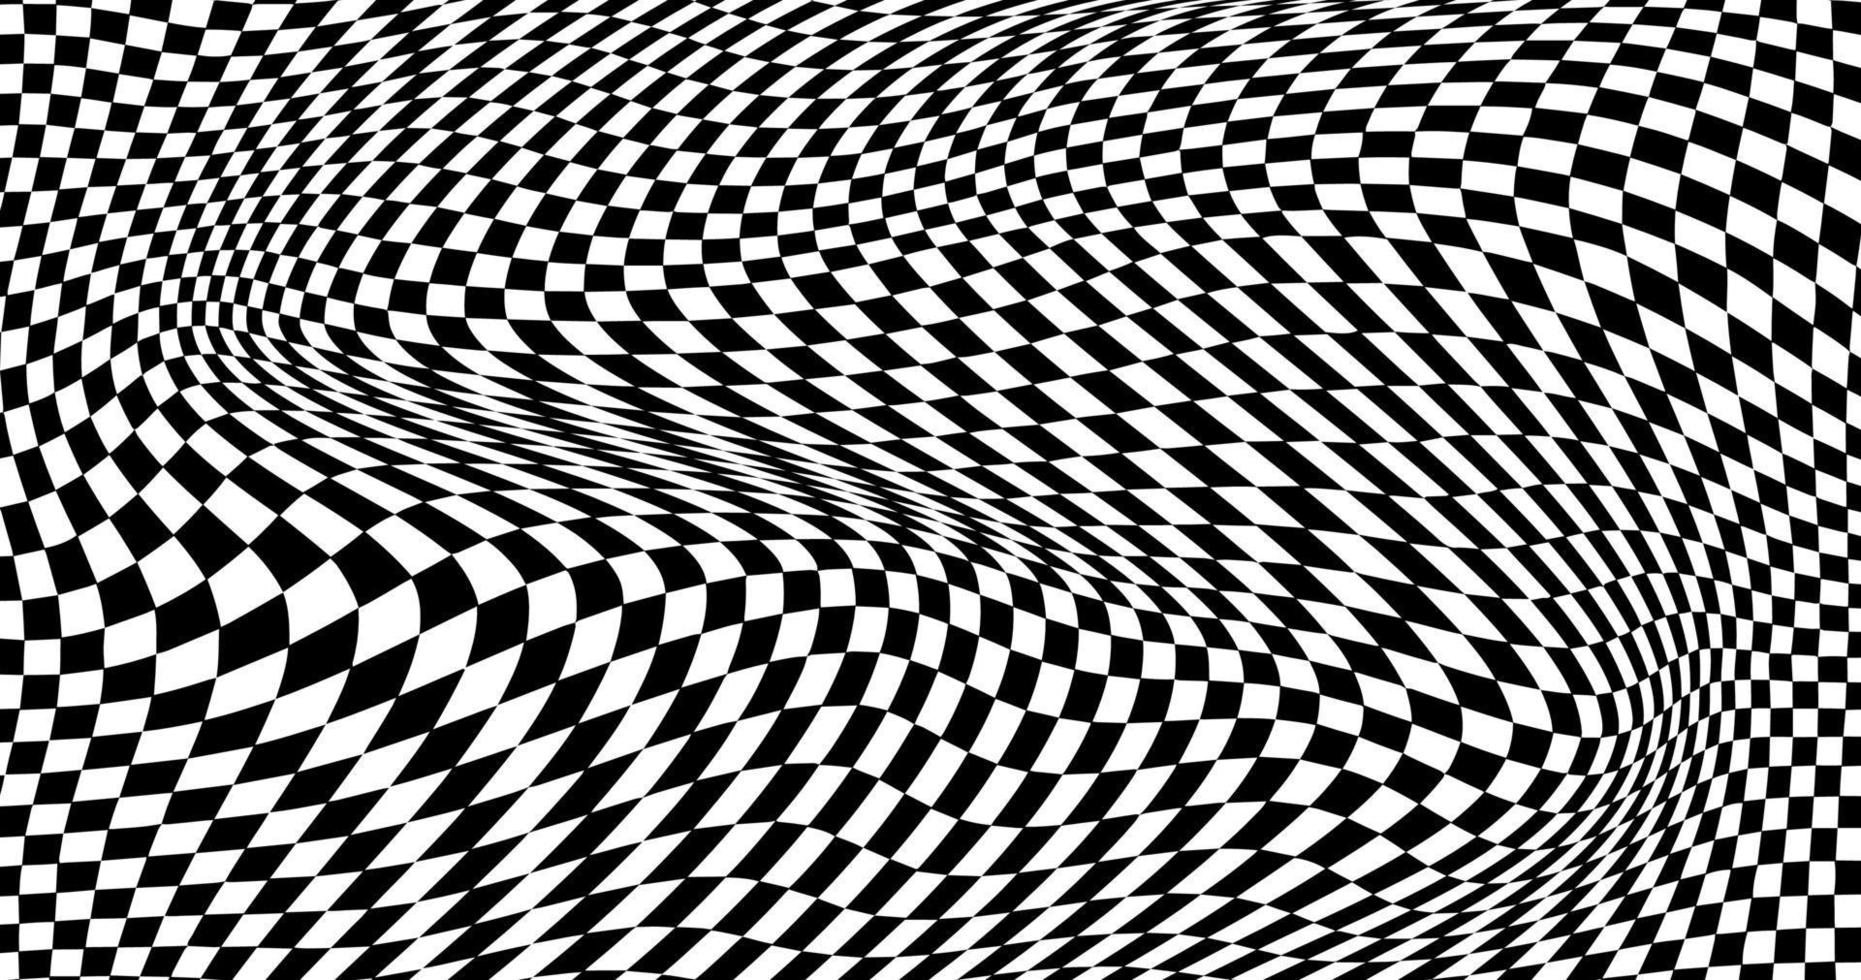 Black and white distorted checkered background vector